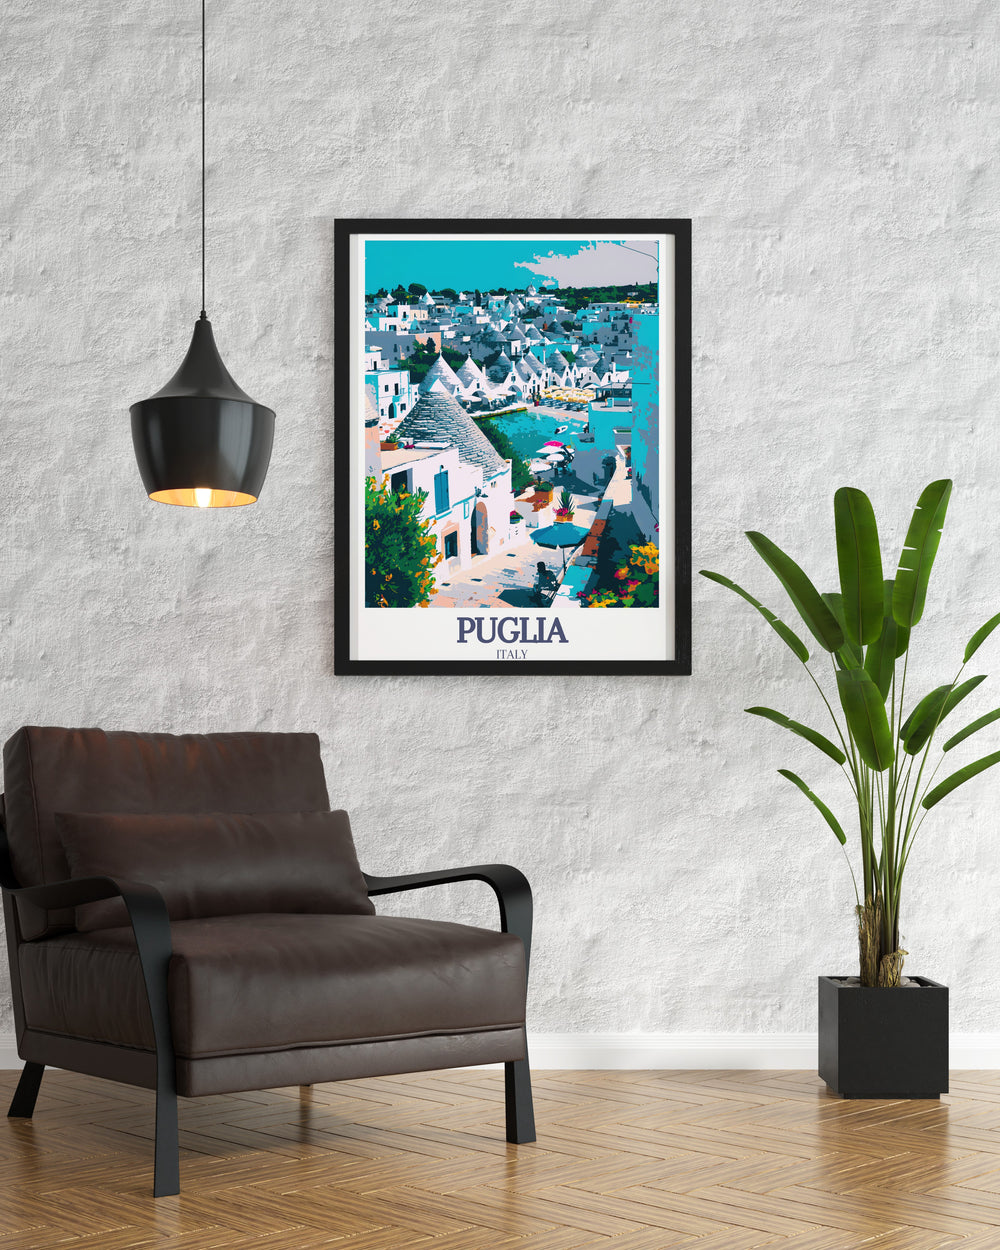 Elevate your living space with our Puglia Art featuring Trulli houses and the Adriatic Sea. This Italy Wall Poster is designed to add elegance and sophistication to any room, with its detailed depiction of Italys iconic Trulli houses and stunning Adriatic Sea views.